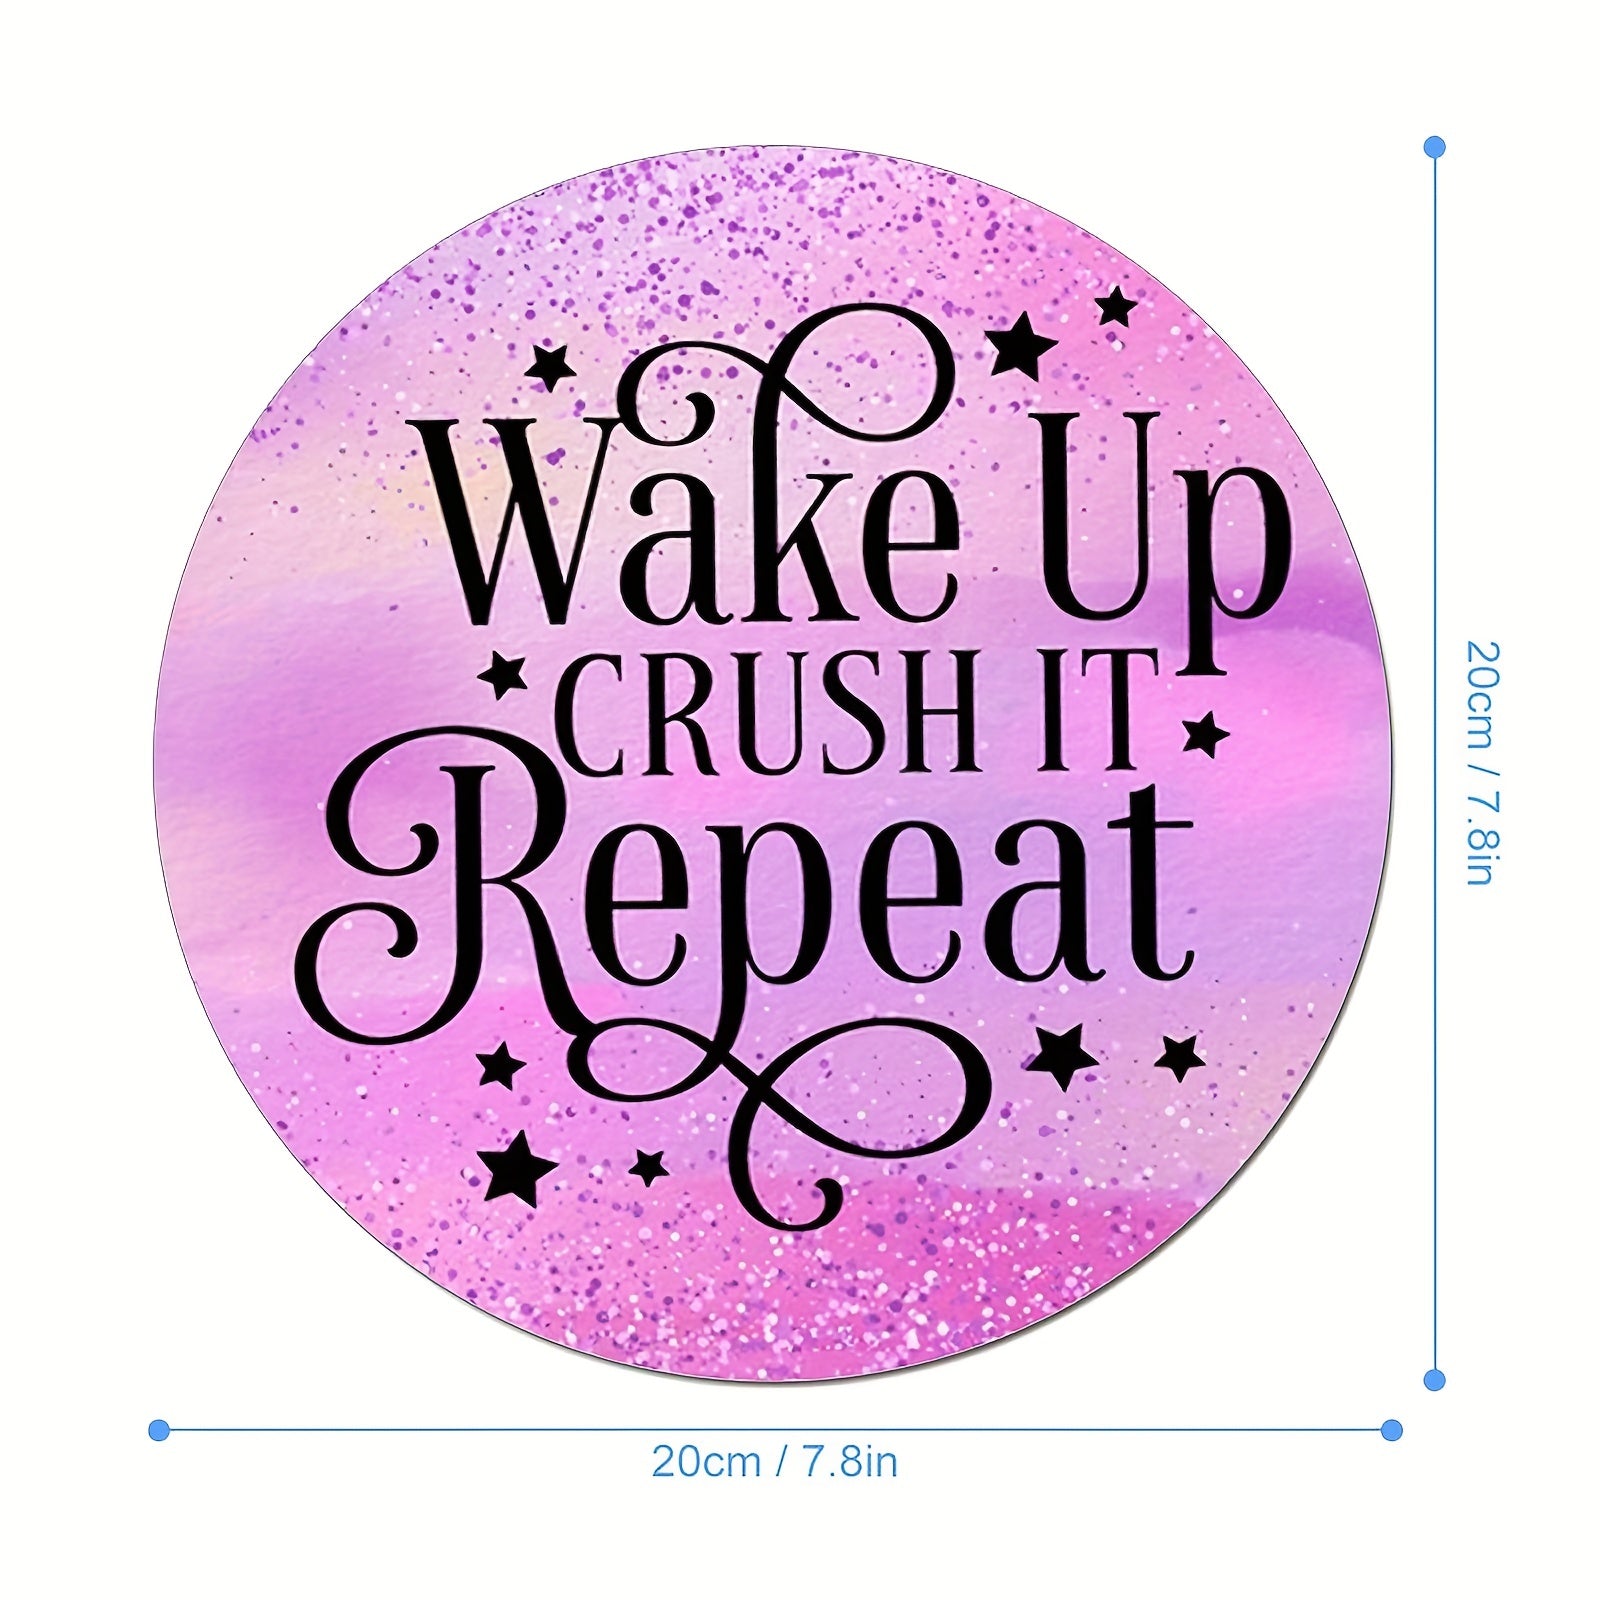 1pc Wake Up Crush It Repeat Christian Computer Mouse Pad, 7.8*7.8*0.12inch/ 19.81*19.81*0.3cm claimedbygoddesigns